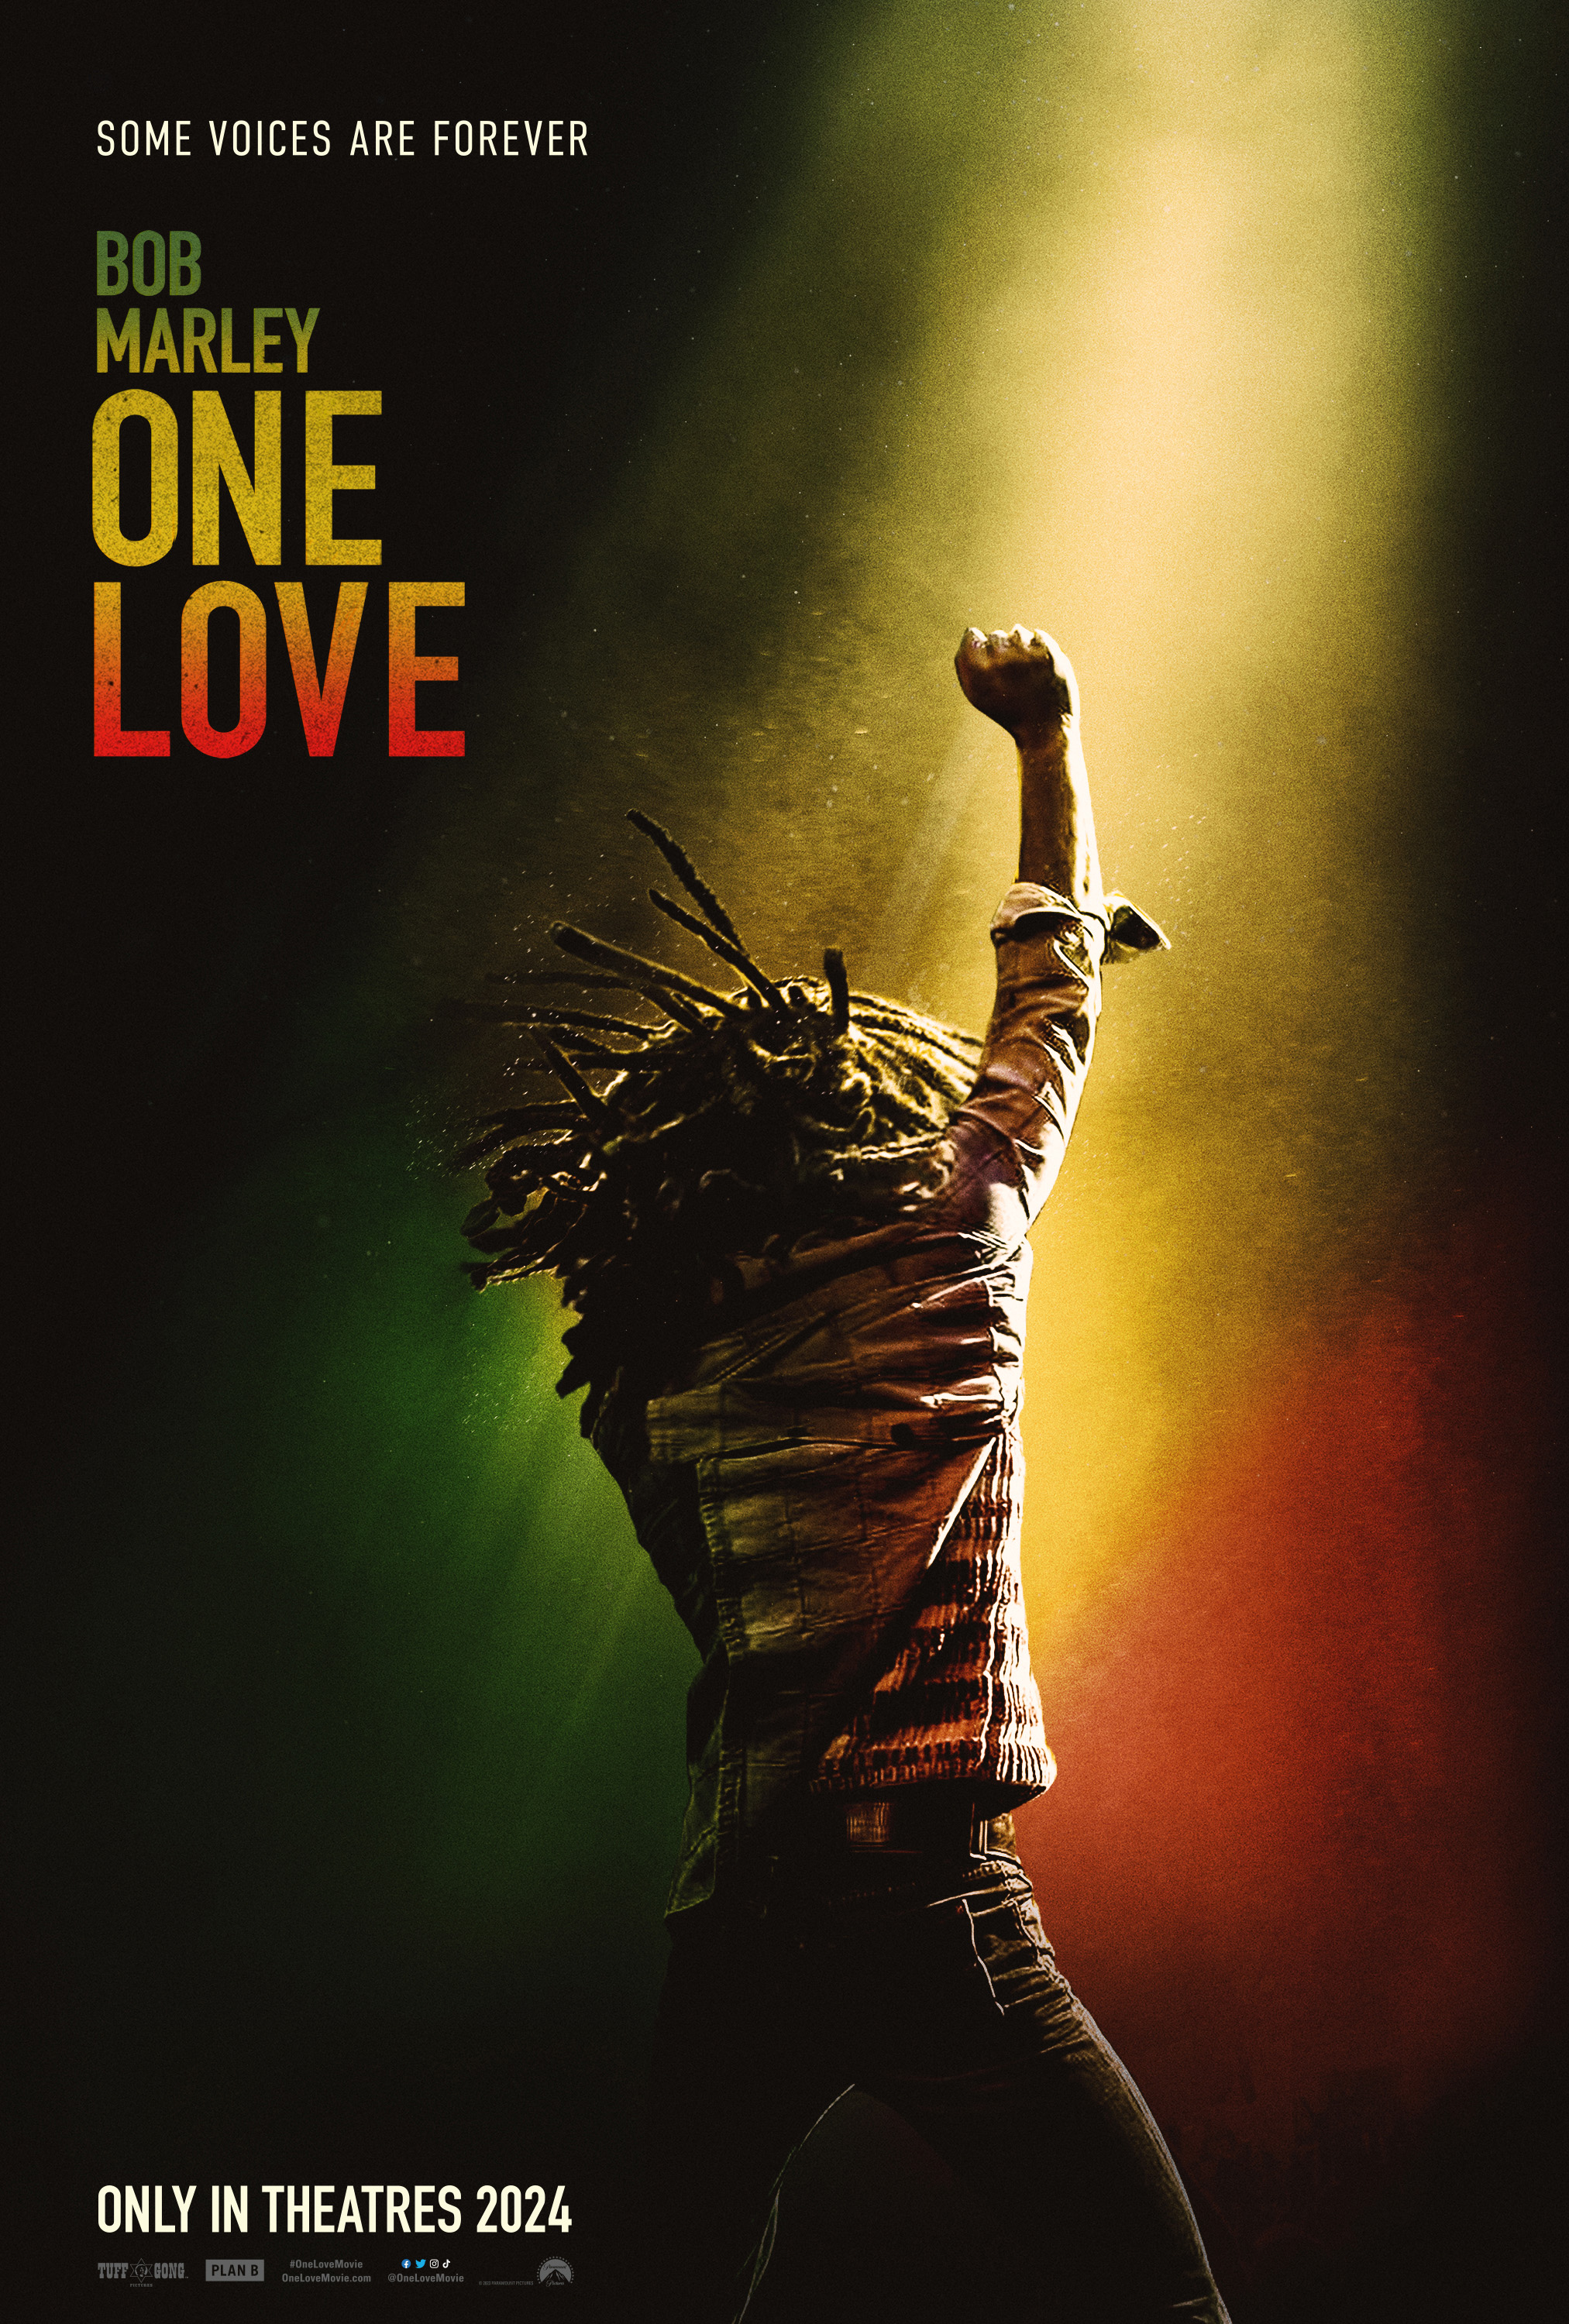 udsagnsord Møde overskydende Regal on Twitter: "NEW POSTER for 'Bob Marley: One Love' – coming to Regal  on January 12, 2024. Starring Kingsley Ben-Adir as Bob Marley, discover  Bob's powerful story of overcoming adversity and